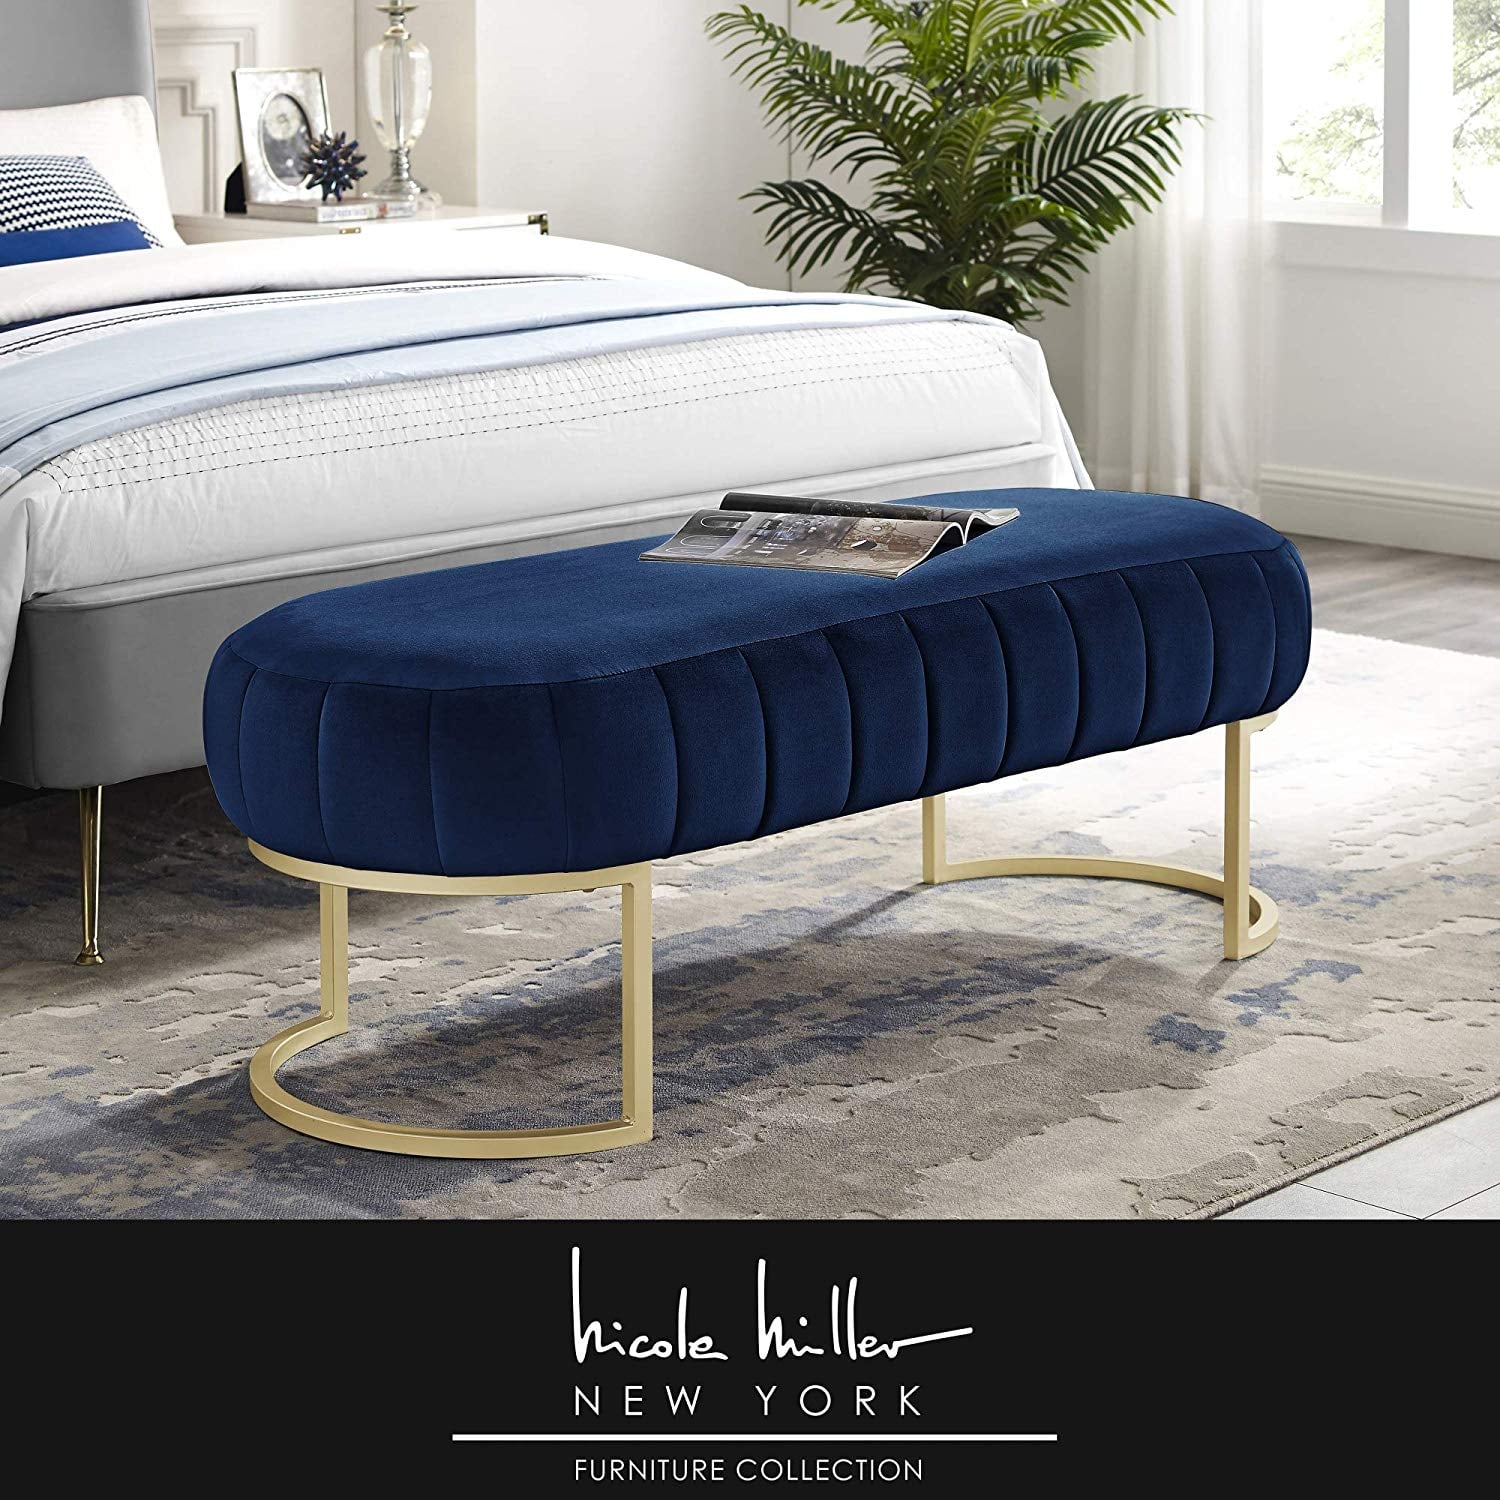 Nicole Miller Velvet Bench Classic Blue Home Pieces To Buy To